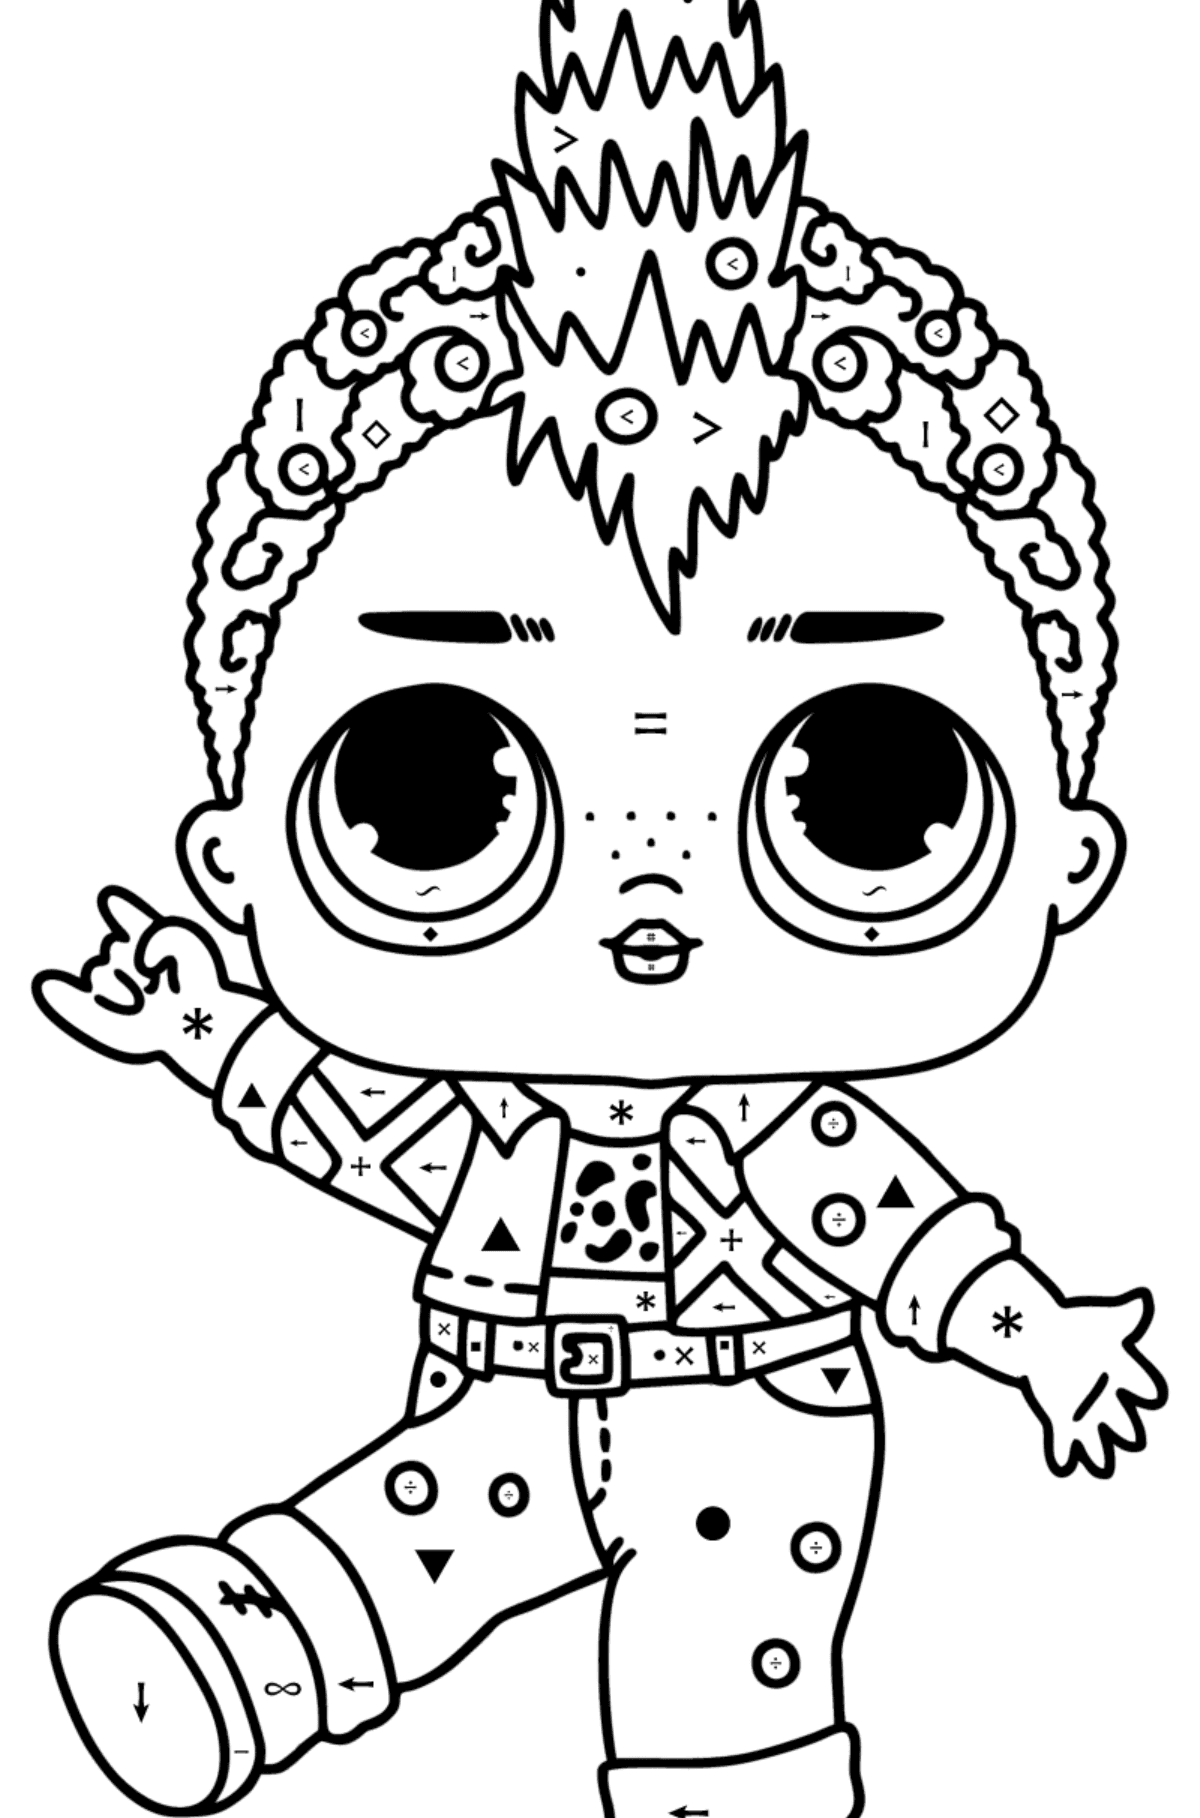 Colouring page LOL Surprise Punk Boi - Coloring by Symbols for Kids